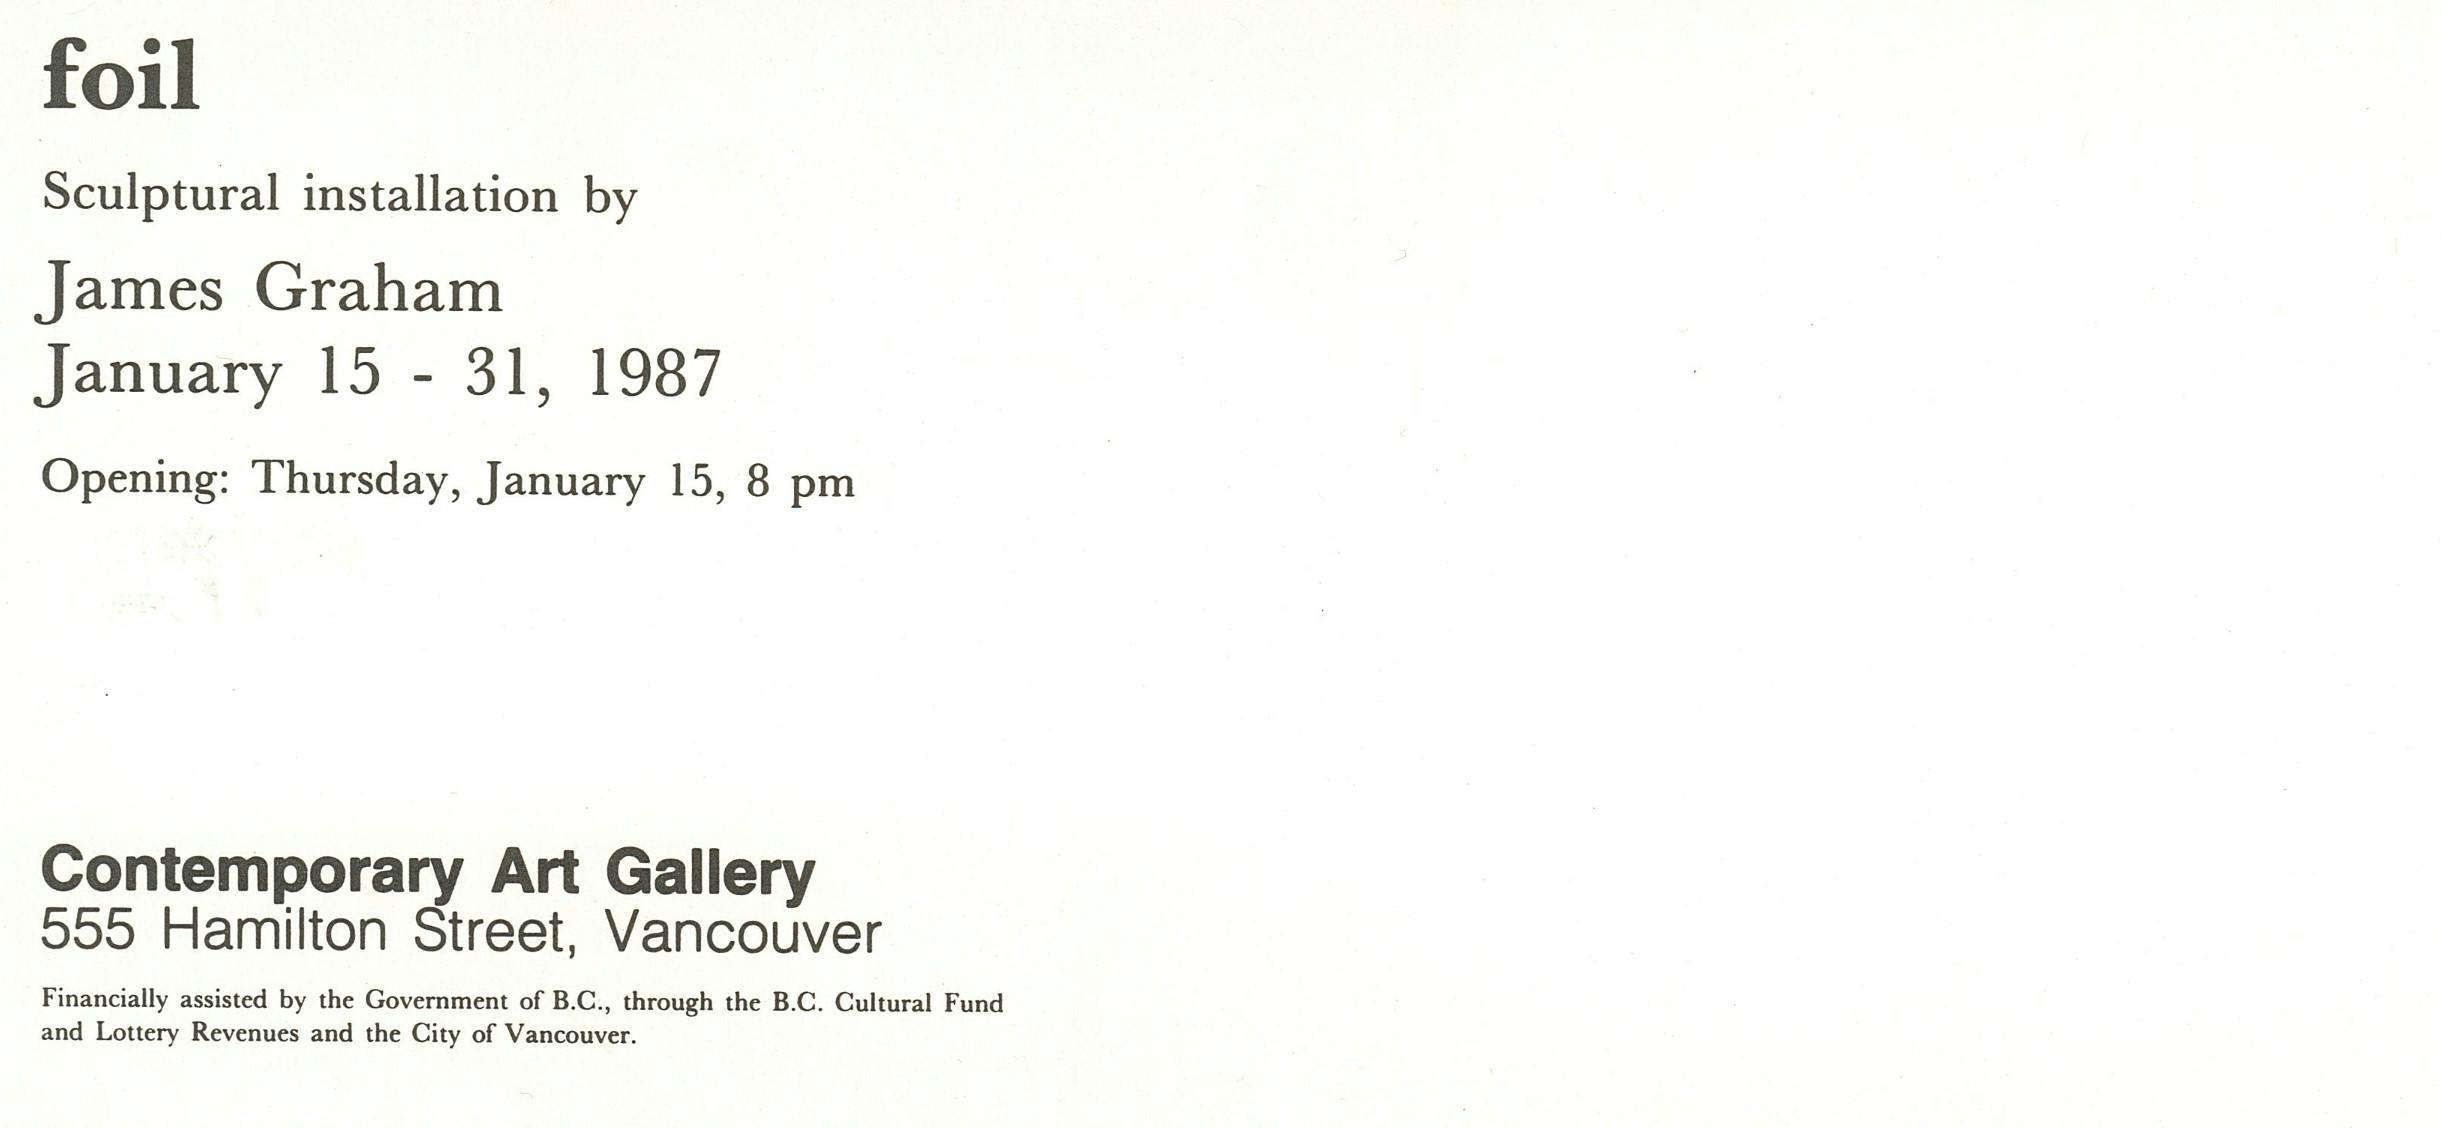 A scanned exhibition invitation. It is a long horizontal rectangle with a plain white background and contains information including the artist name, the dates and gallery address in black text. 